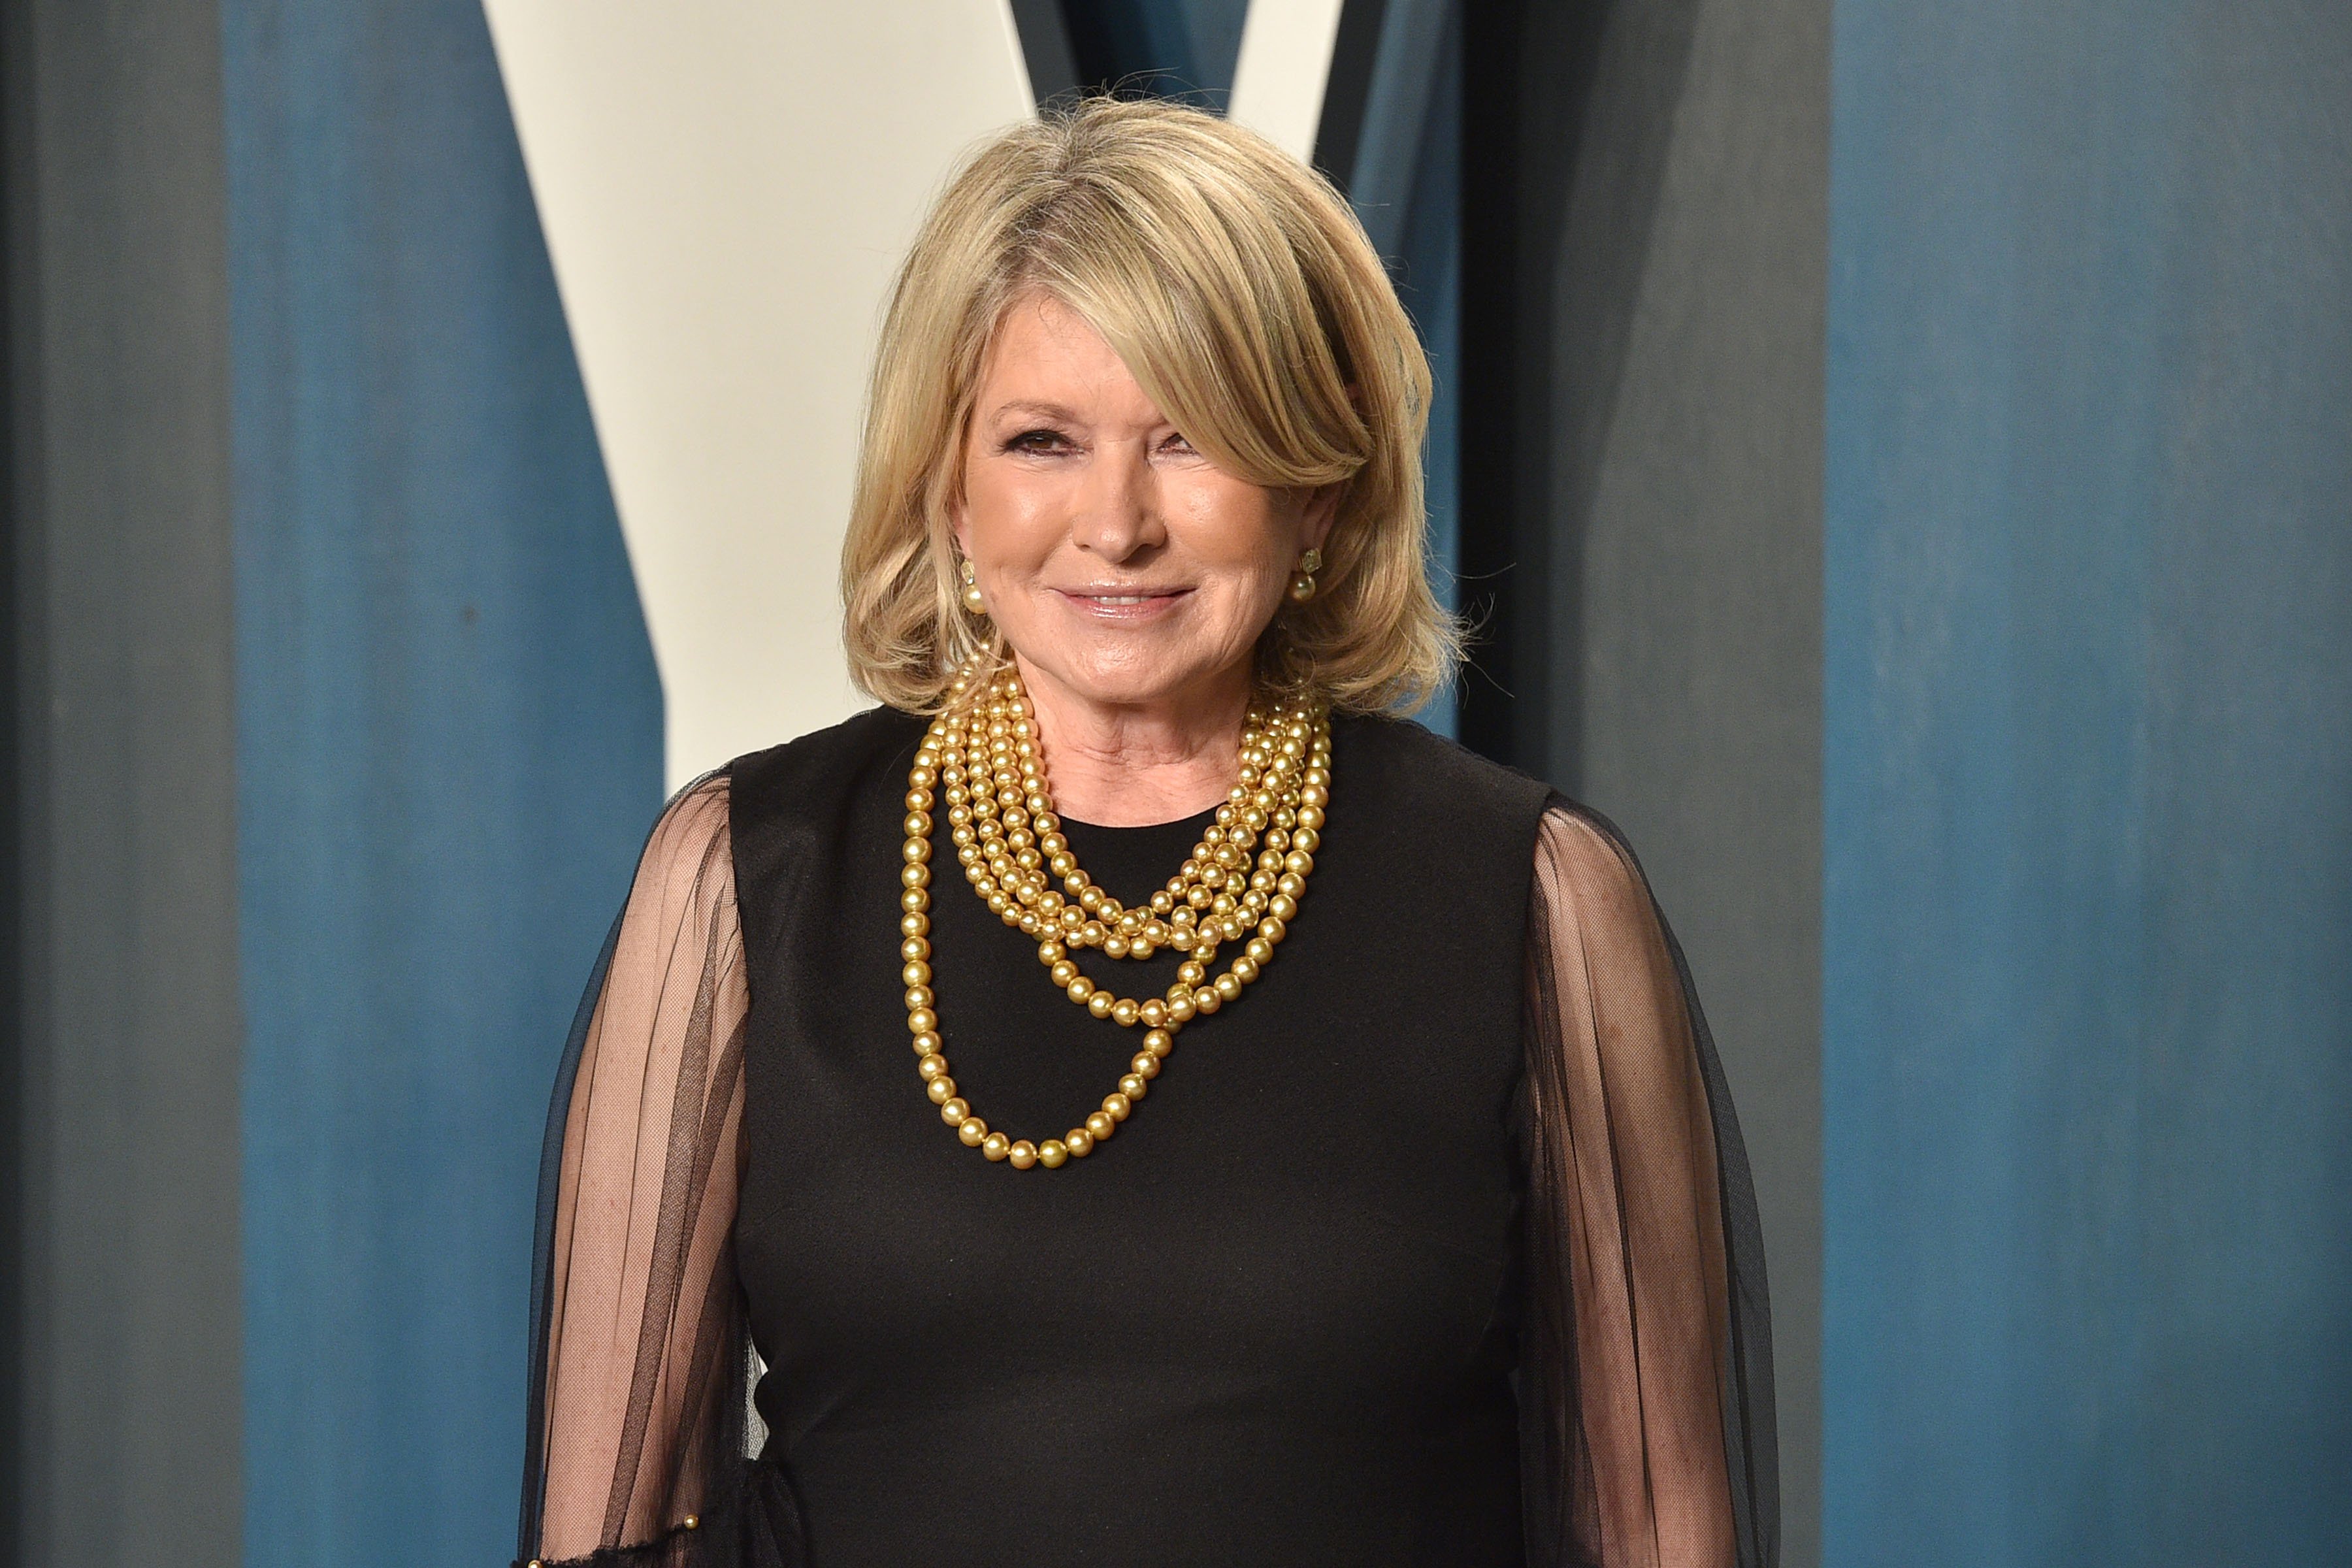 Martha Stewart attends the 2020 Vanity Fair Oscar Party at Wallis Annenberg Center for the Performing Arts on February 9, 2020 in Beverly Hills, California. | Source: Getty Images